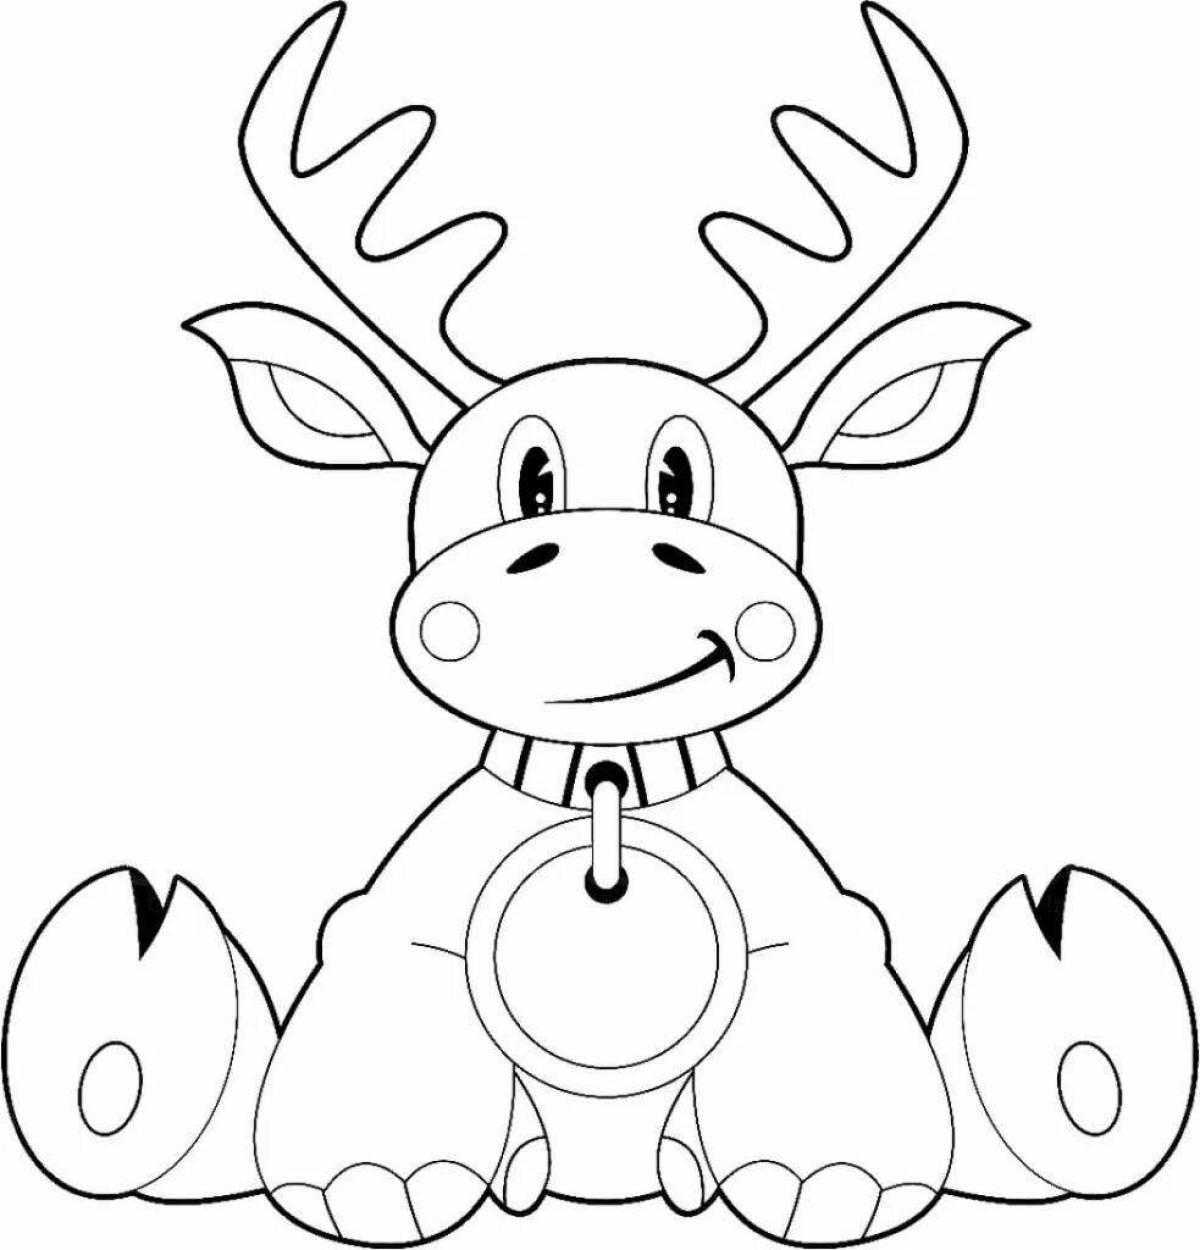 Coloring book cute elk for children 6-7 years old